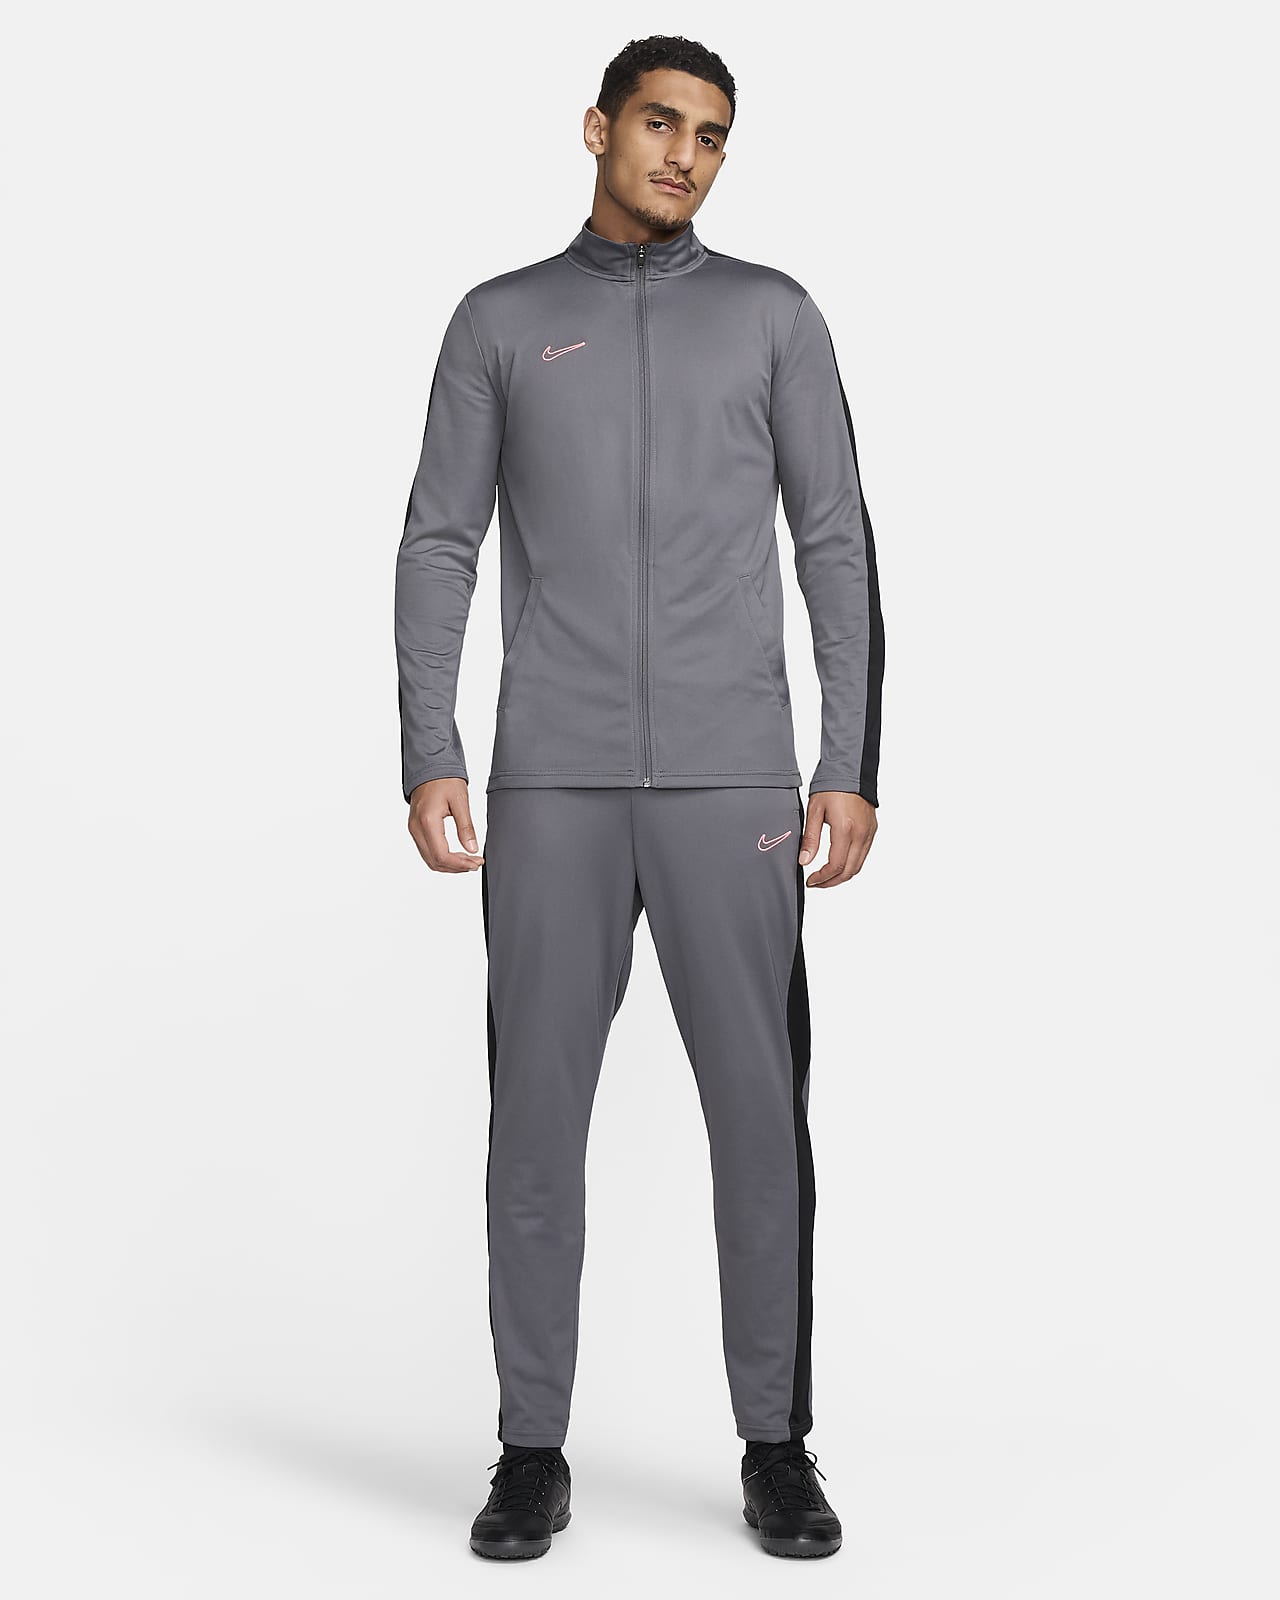 NIKE TRACKSUITS**Winter TRACK SUIT*Brand: *nike*Pattern: Full SleevesStuff:  2 Thread Fleece with Heavy GSM,